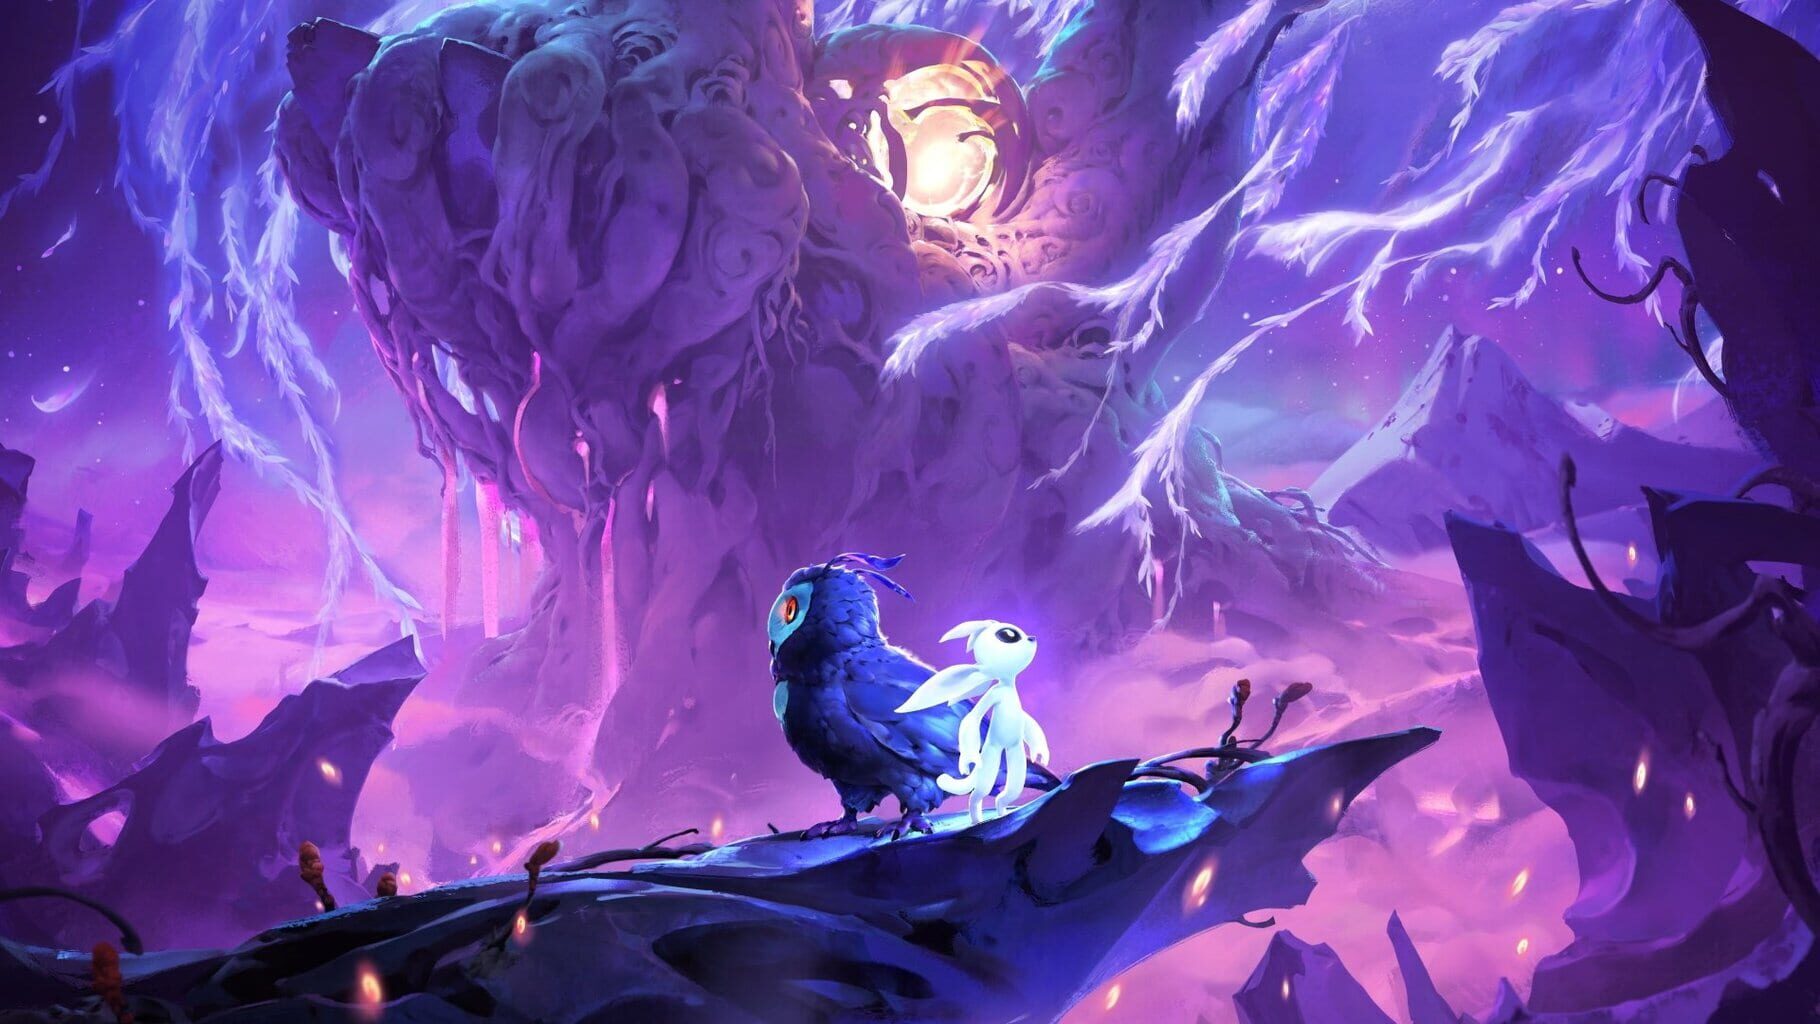 Artwork for Ori and the Will of the Wisps